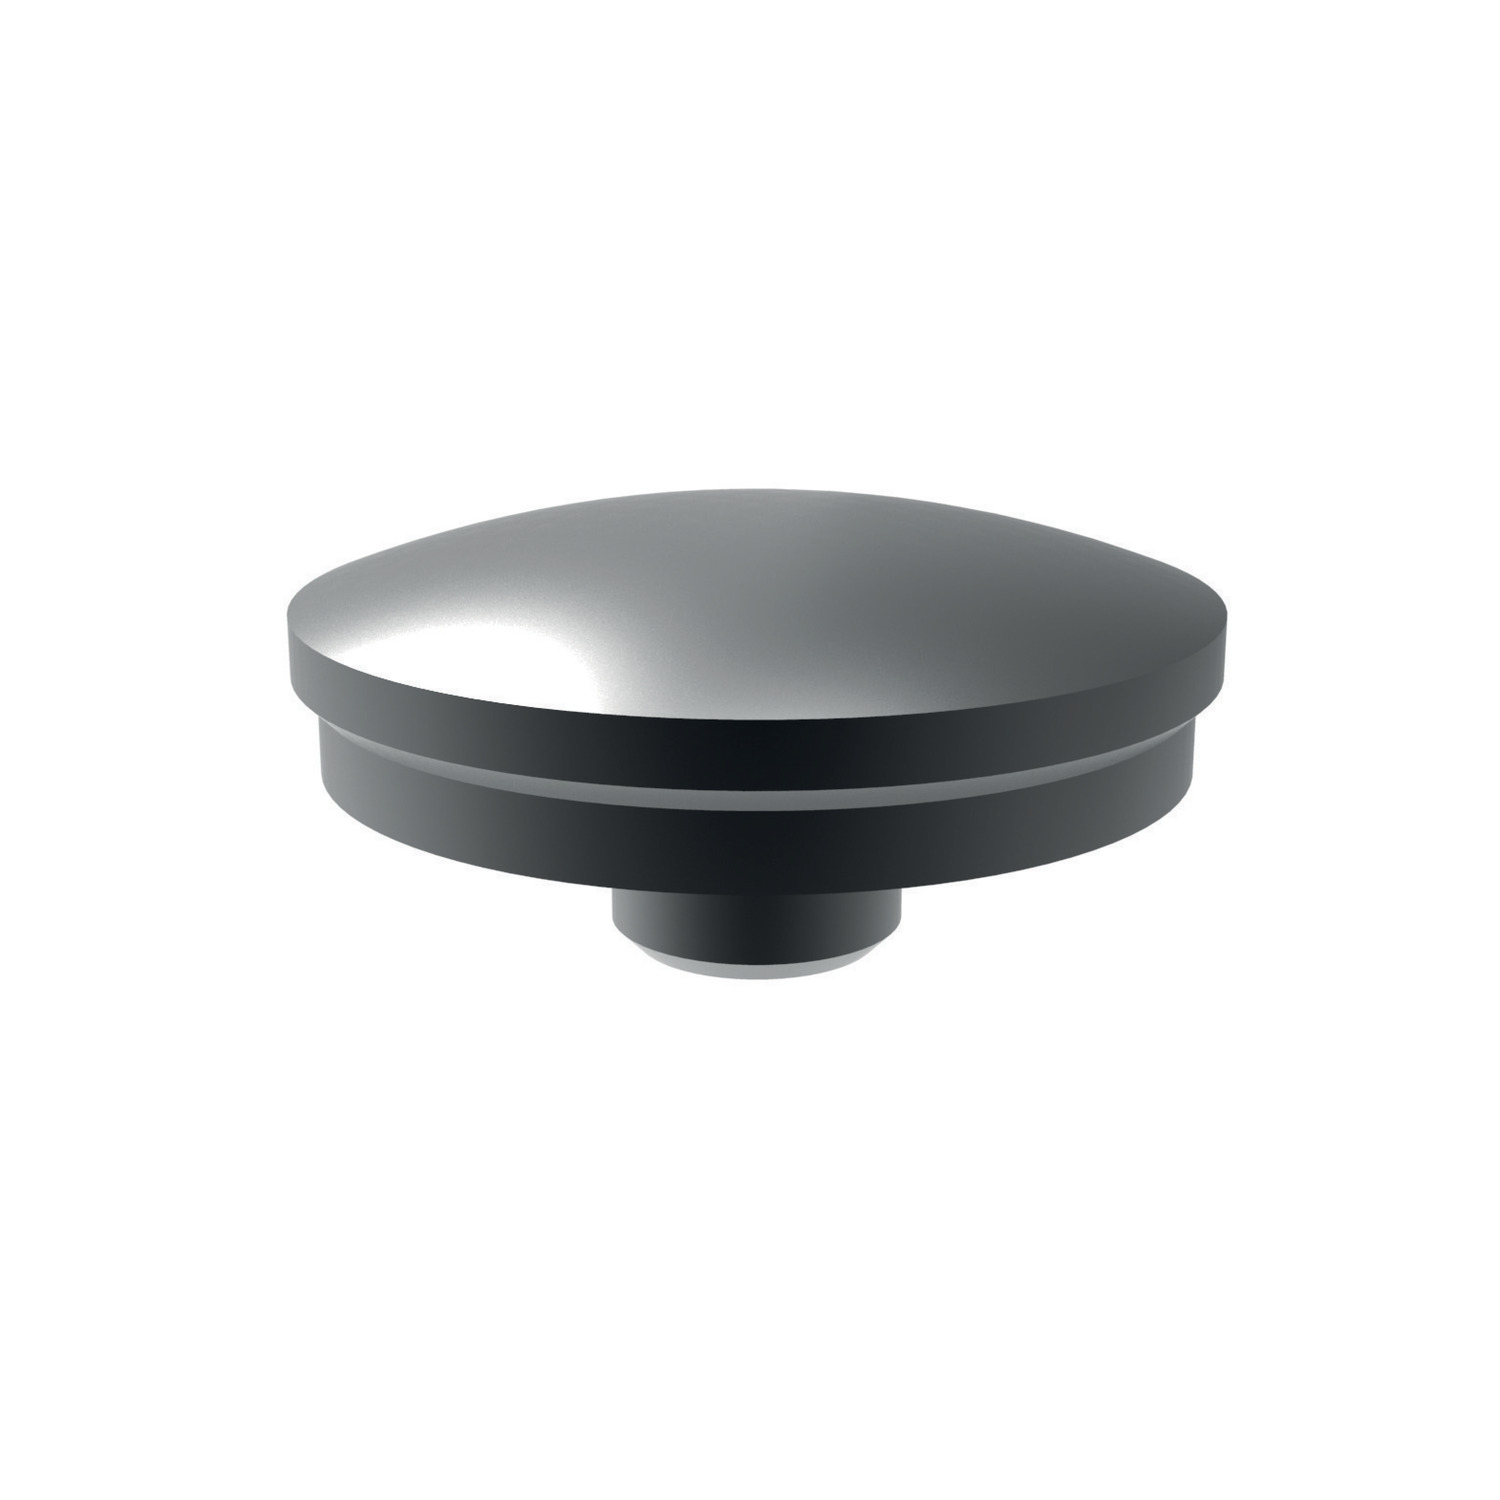 Product 15030, Locating Pad - Spherical for screw jacks / 